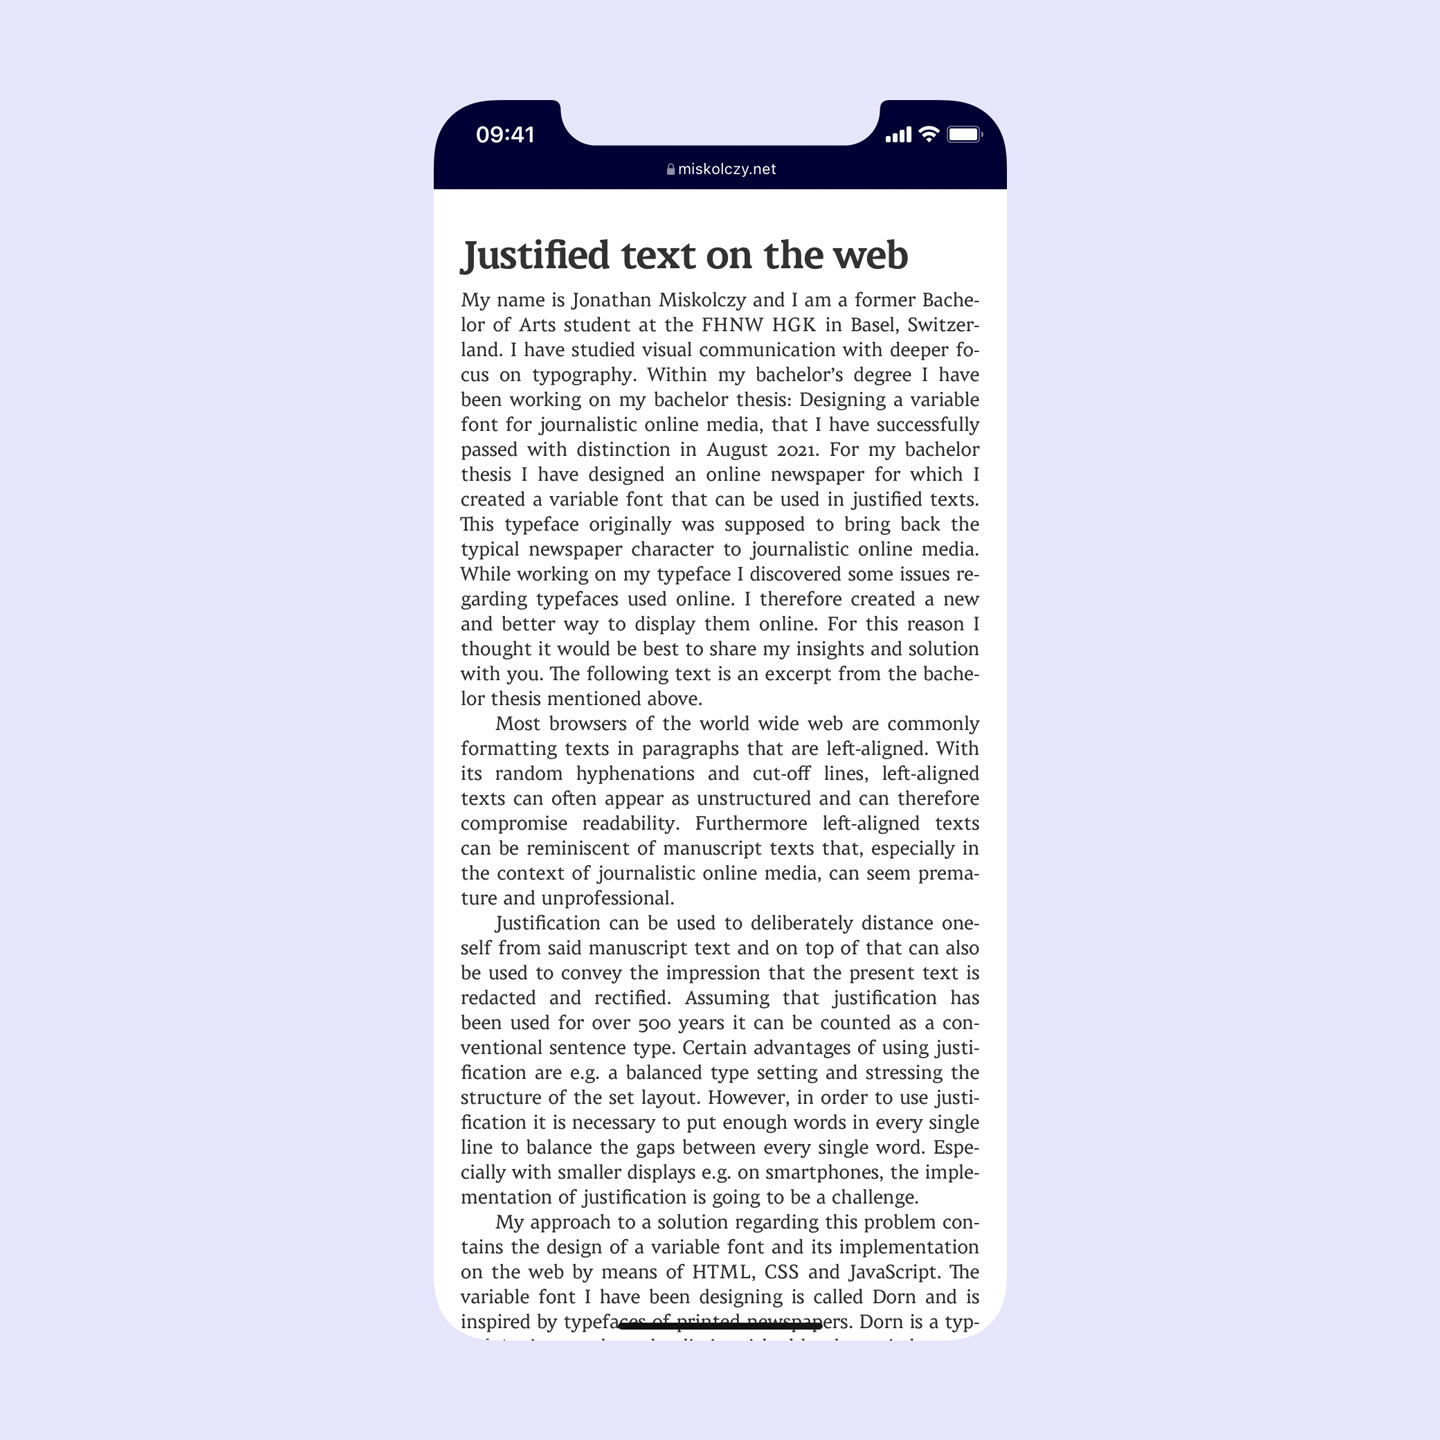 Gallery Justified text on the web dorn type specimen on smartphone portrait mode